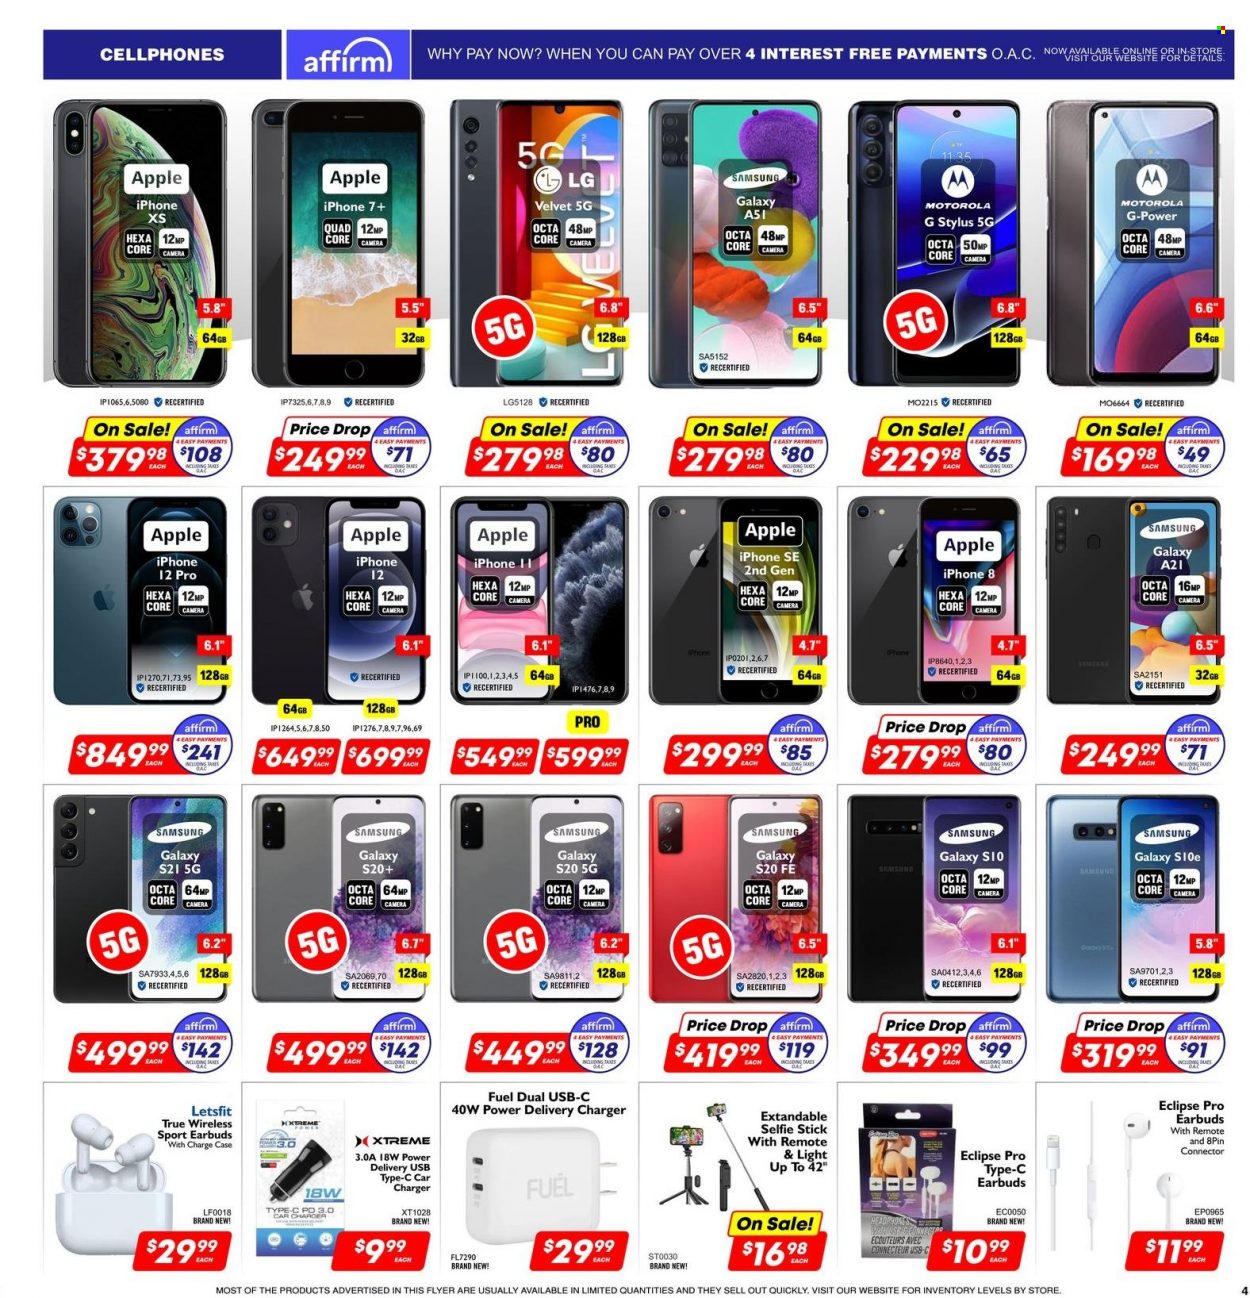 thumbnail - Factory Direct Flyer - March 15, 2023 - March 21, 2023 - Sales products - Apple, Samsung Galaxy, cake, Samsung, iPhone, iPhone 8, mobile phone, iPhone 12, iPhone SE, Samsung Galaxy A, Samsung Galaxy S, Samsung Galaxy S20, Samsung Galaxy A21, Samsung Galaxy A51, Samsung Galaxy S10, Samsung Galaxy S21, iPhone 12 Pro, selfie stick, headphones, earbuds, camera, LG, Motorola, iPhone 7, iPhone XS. Page 4.